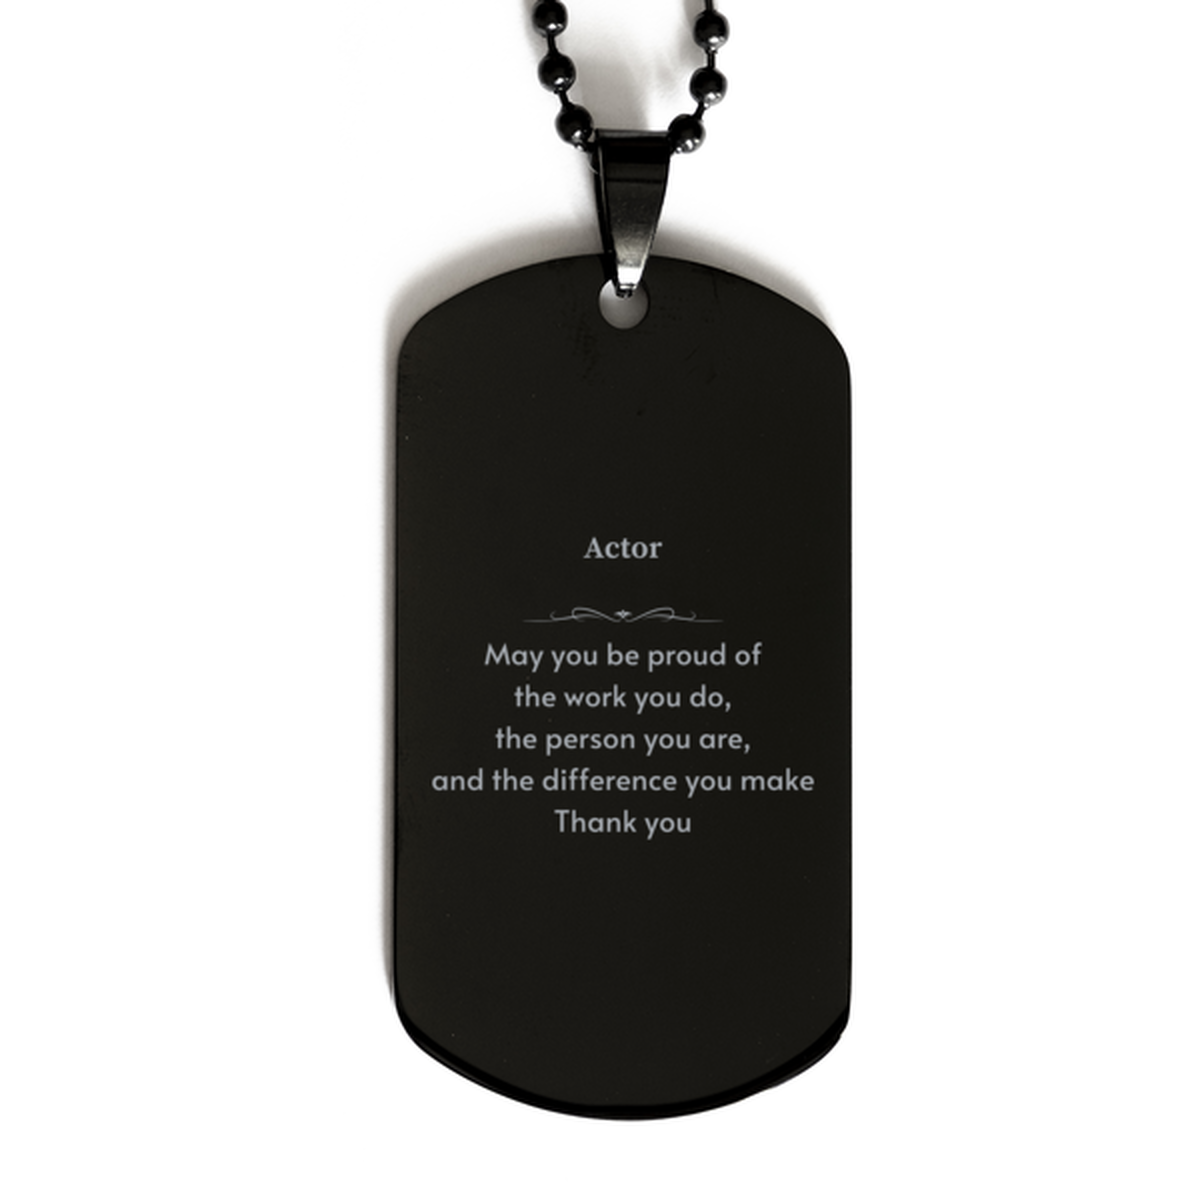 Heartwarming Black Dog Tag Retirement Coworkers Gifts for Actor, Actor May You be proud of the work you do, the person you are Gifts for Boss Men Women Friends